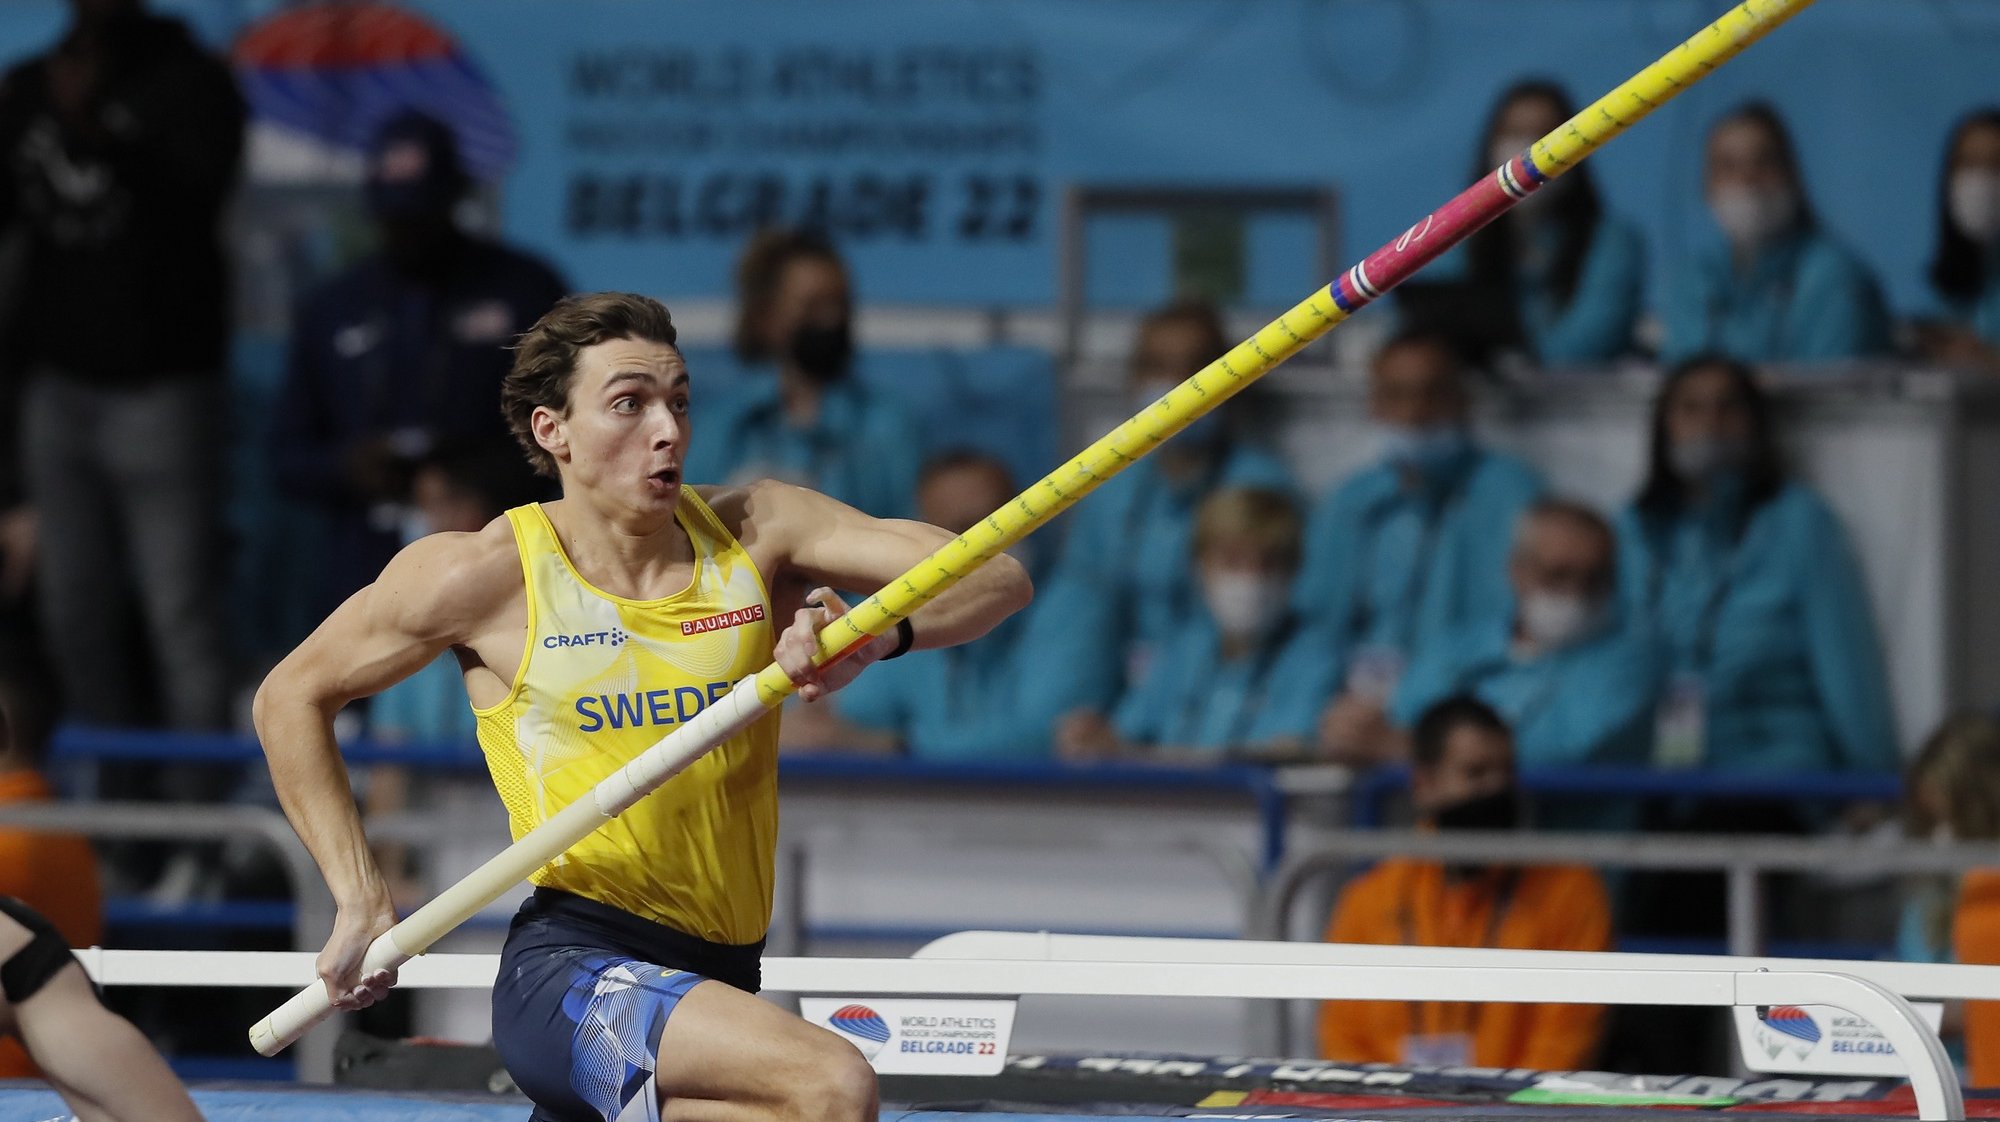 epa09839692 Armand Duplantis of Sweden performs an attempt before to set a new World Record mark at 6.20 meters high during the men&#039;s Pole Vault final at the IAAF World Athletics Indoor Championships in Belgrade, Serbia, 20 March 2022.  EPA/ROBERT GHEMENT